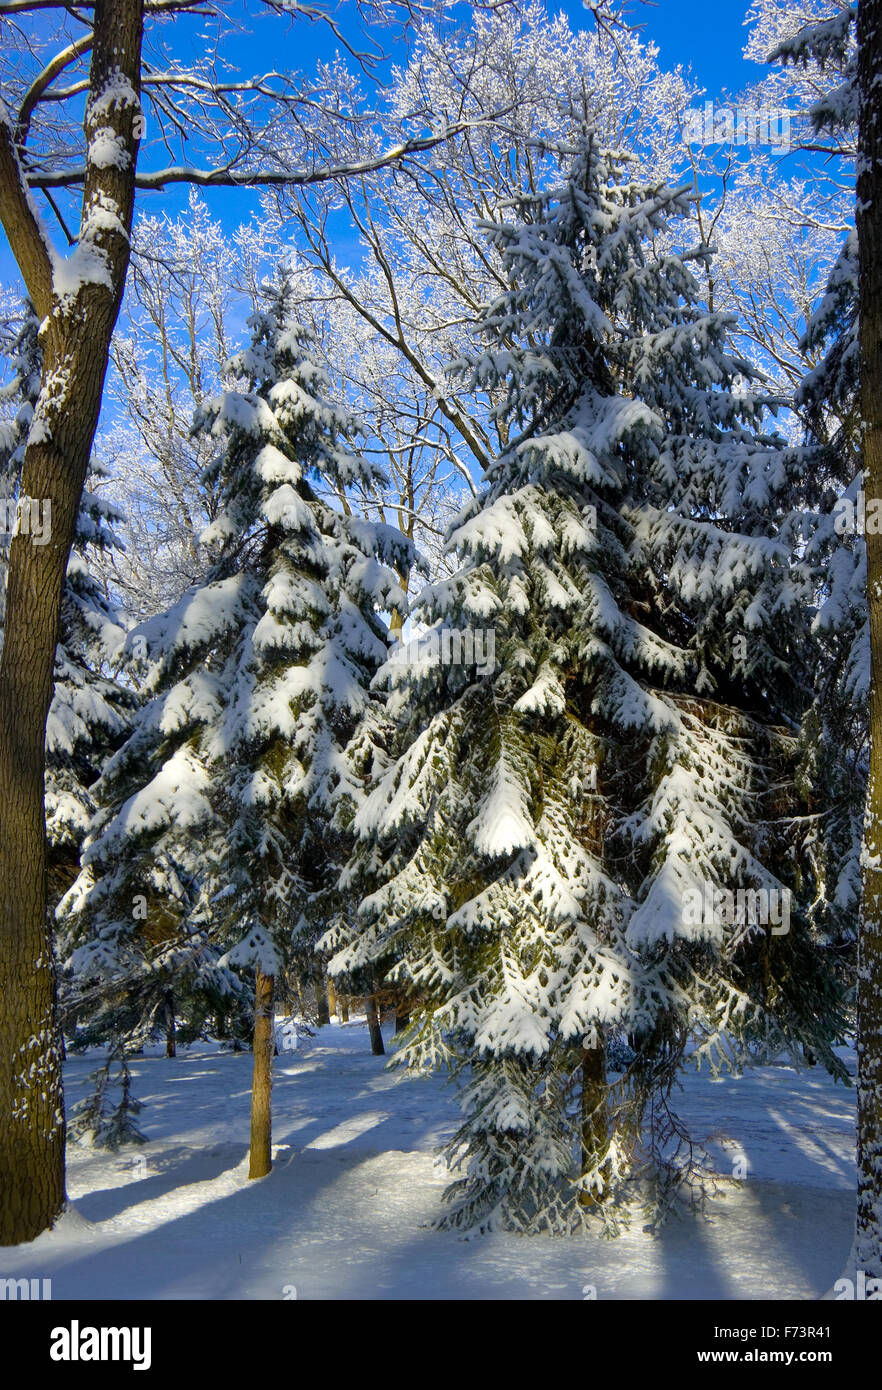 Fir-trees under snow. Sunny day. Vertical format. Stock Photo